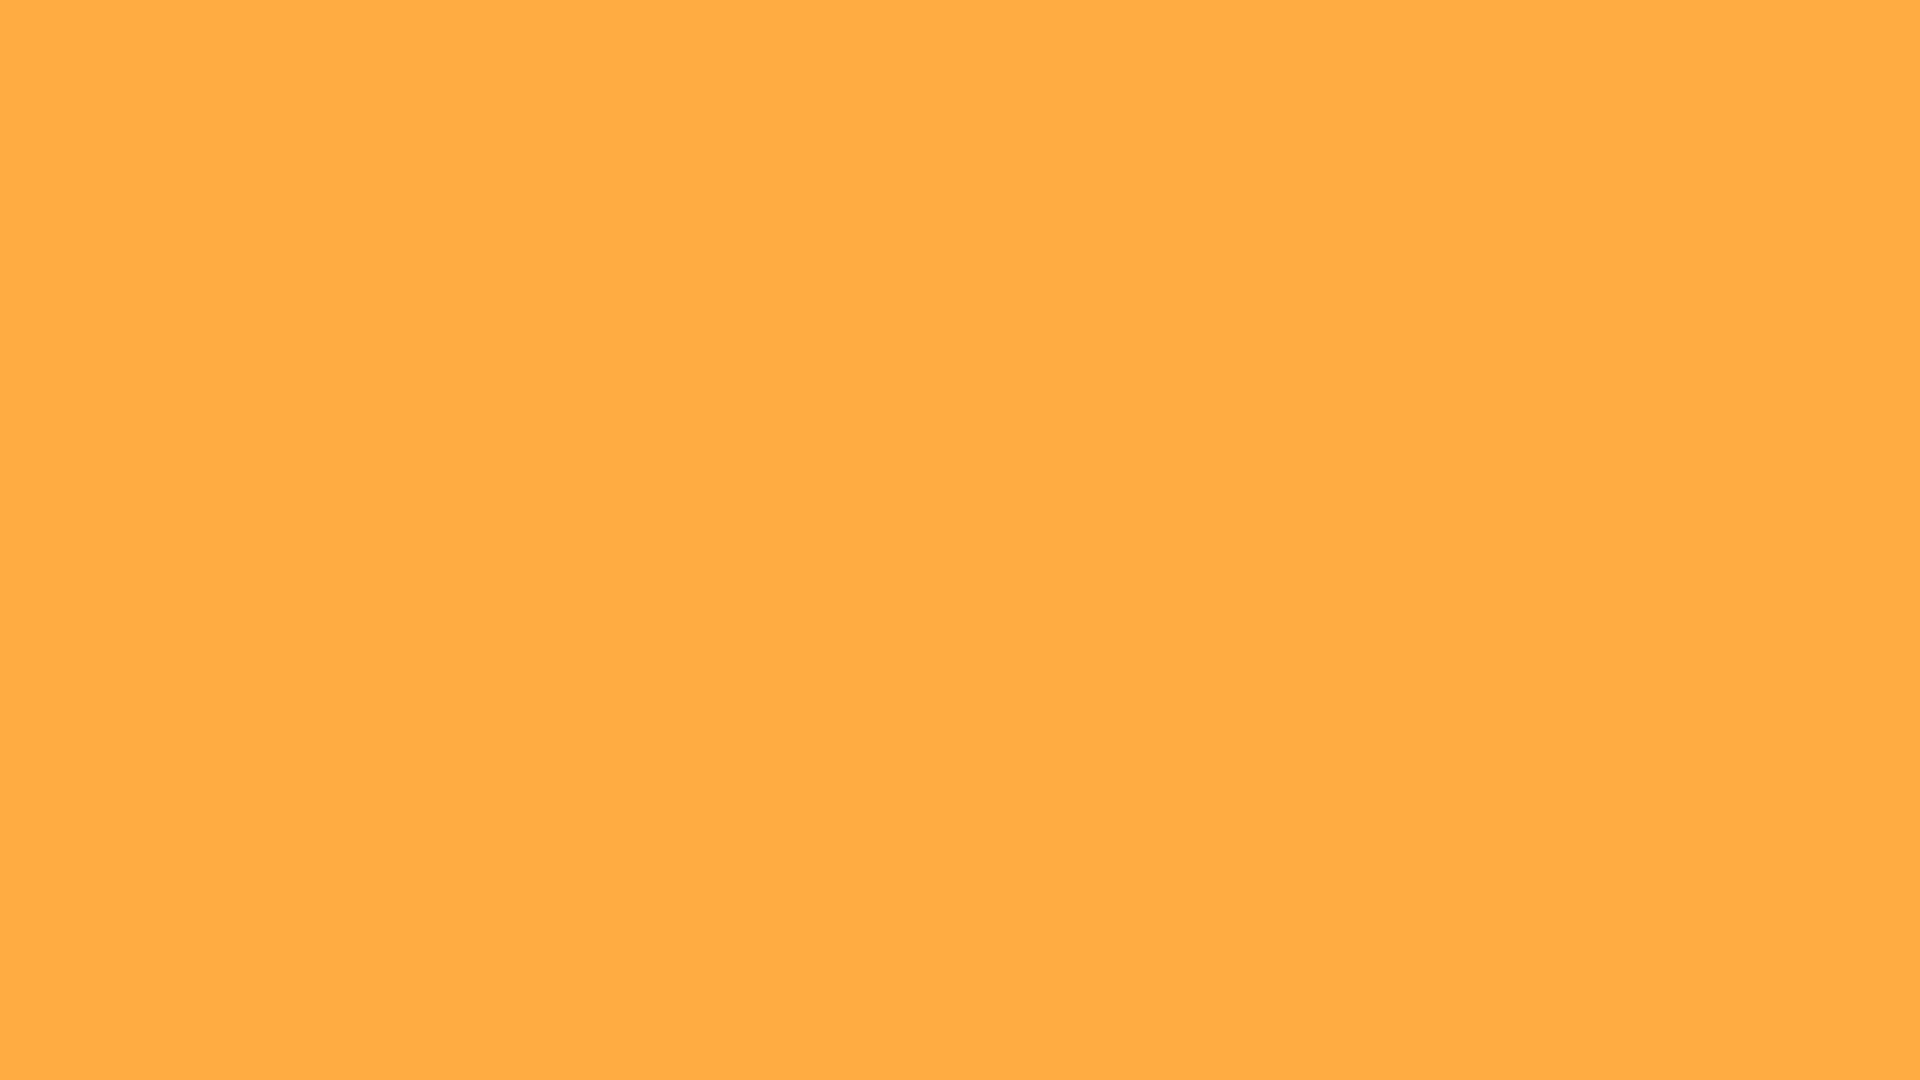 1920x1080 Yellow Orange Solid Color Background